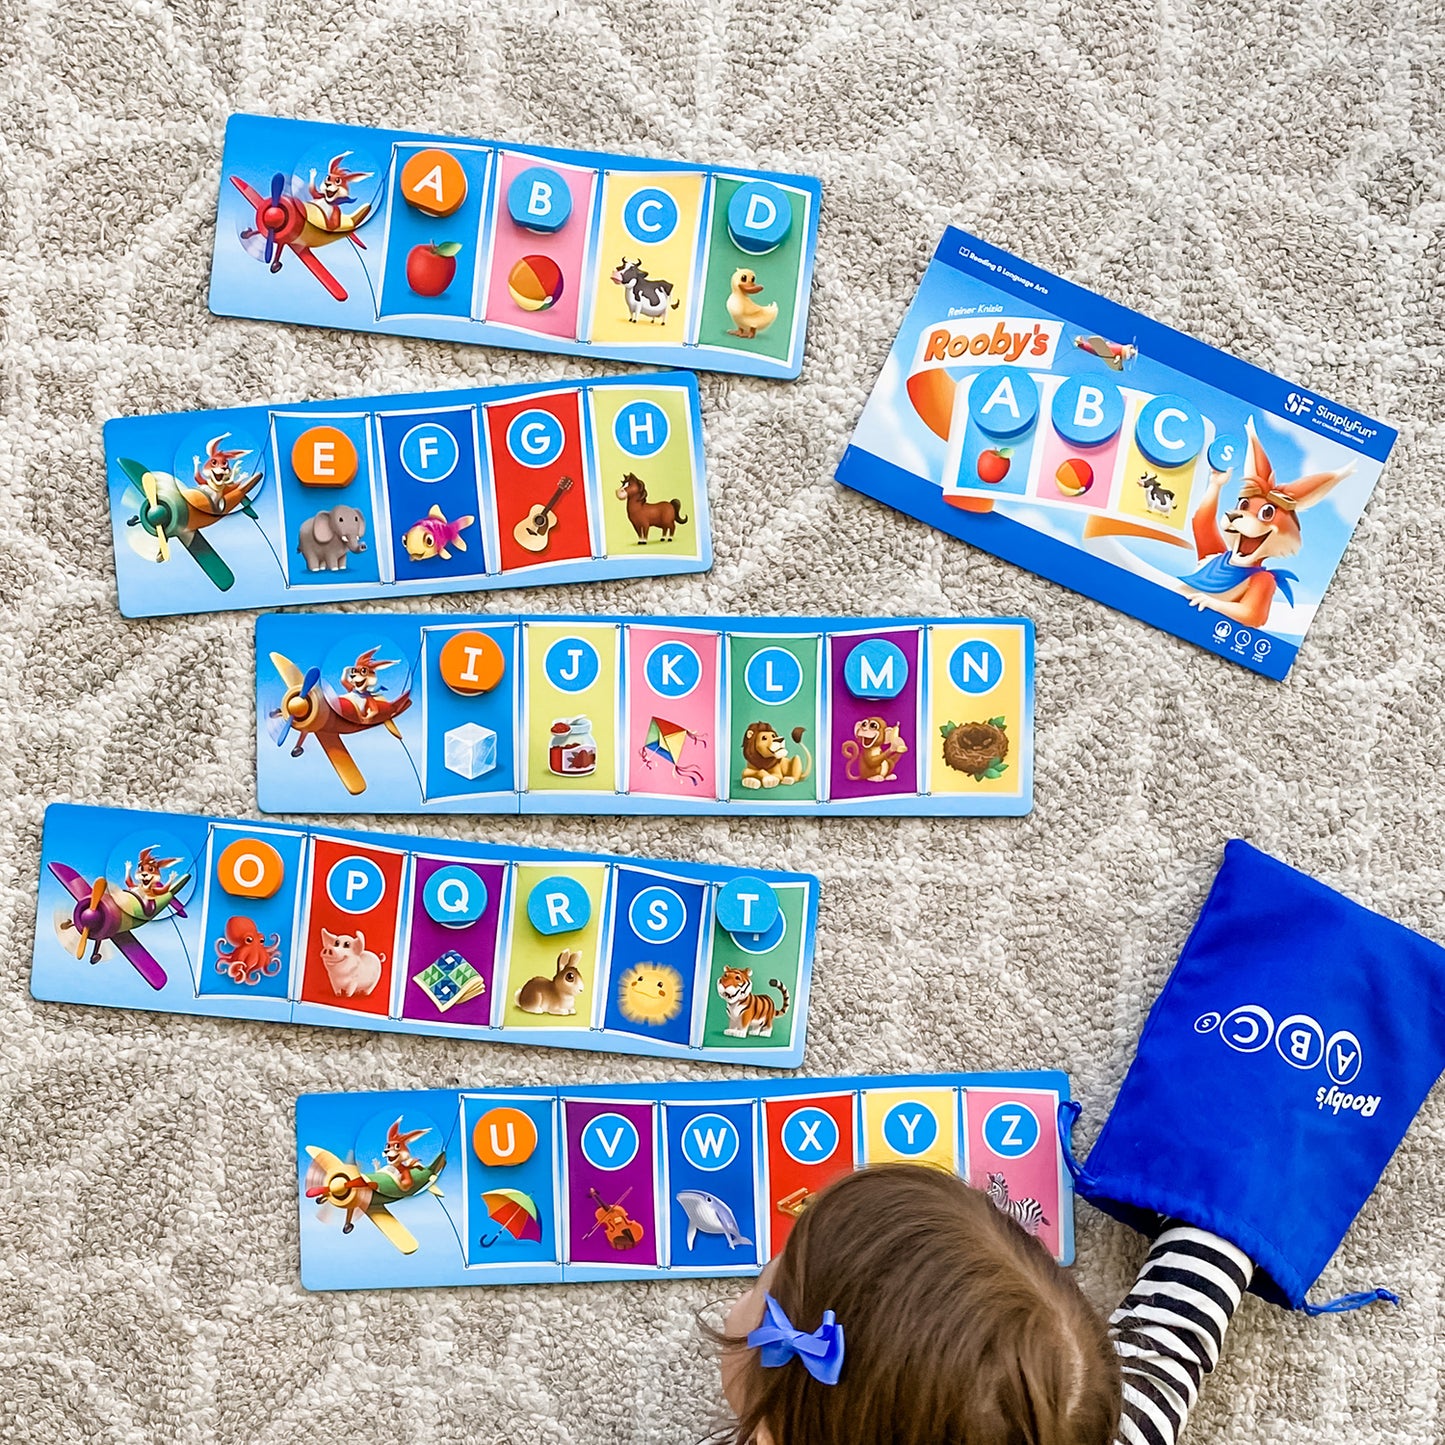 Rooby's ABCs by SimplyFun is a letter recognition game focusing on alphabet sequencing for ages 3 and up.